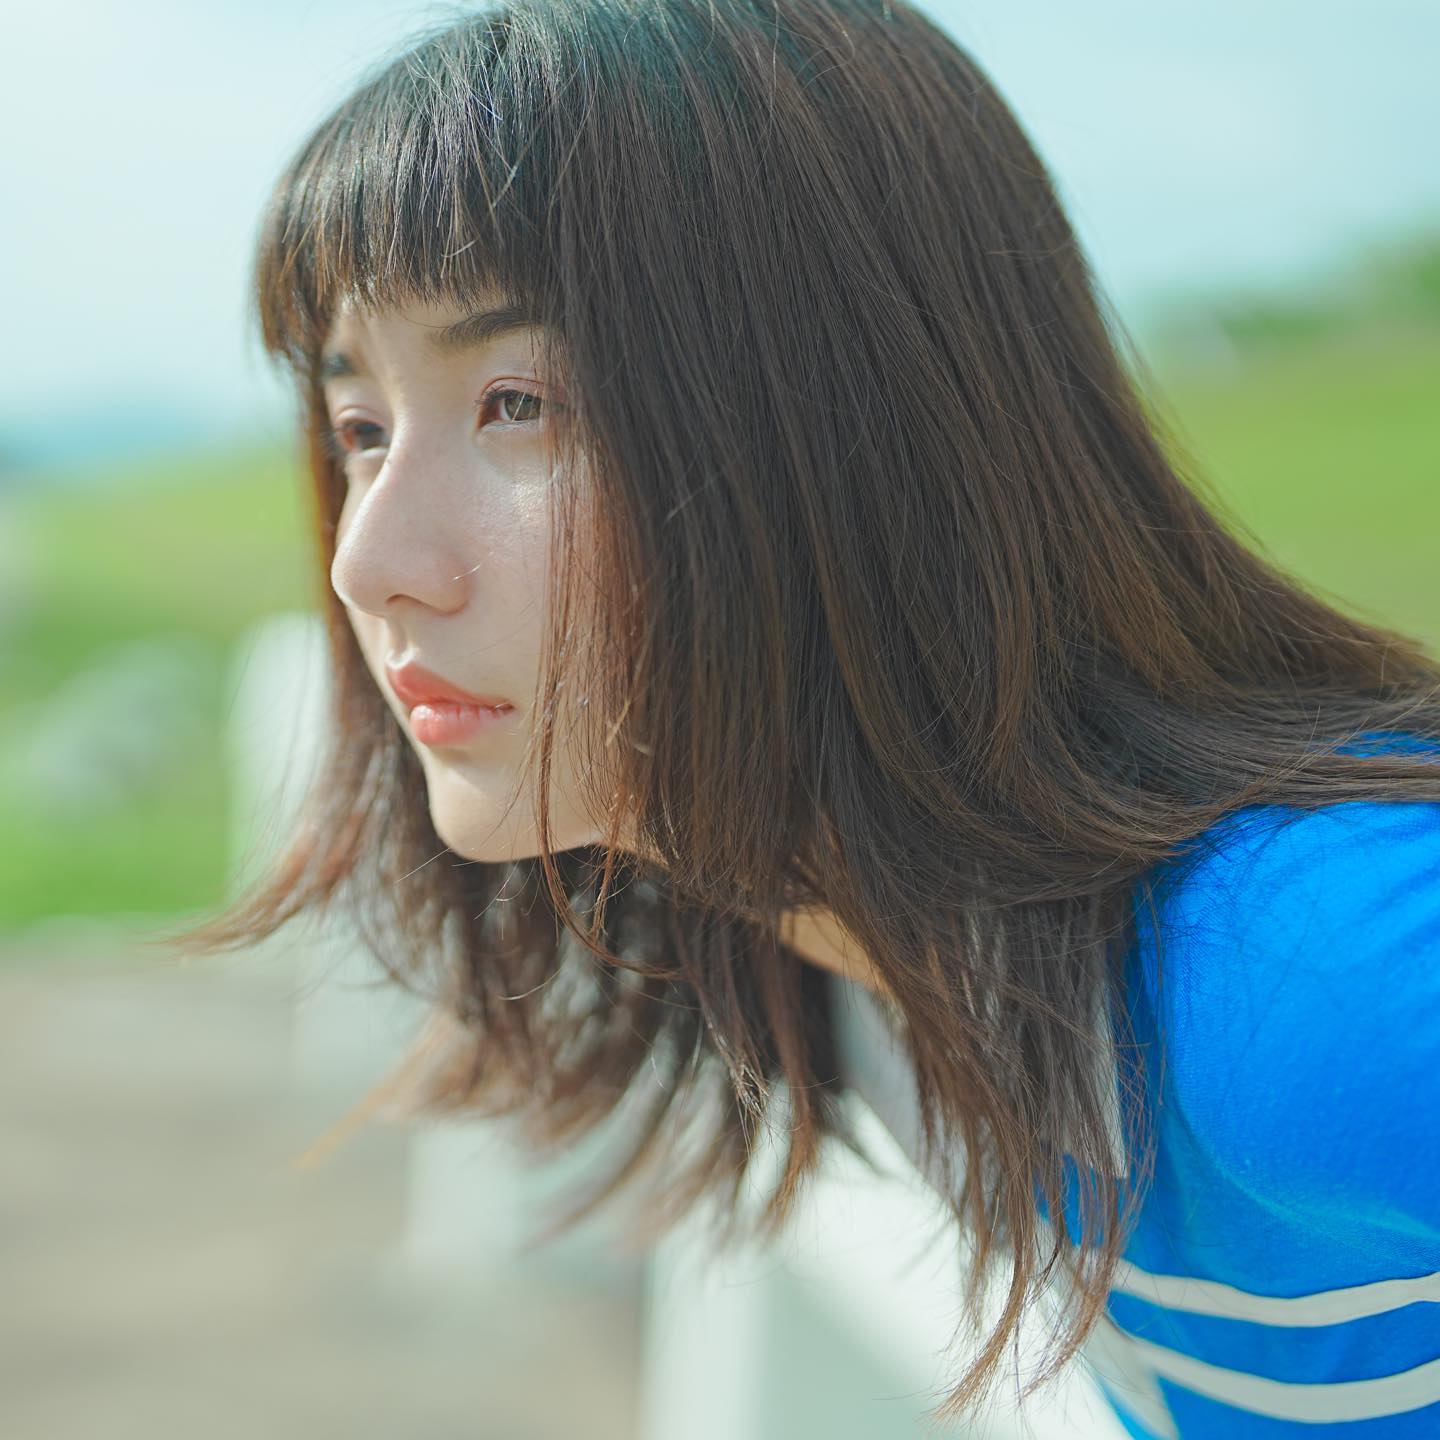 Close up side view of girl in a blue striped top leaning forward